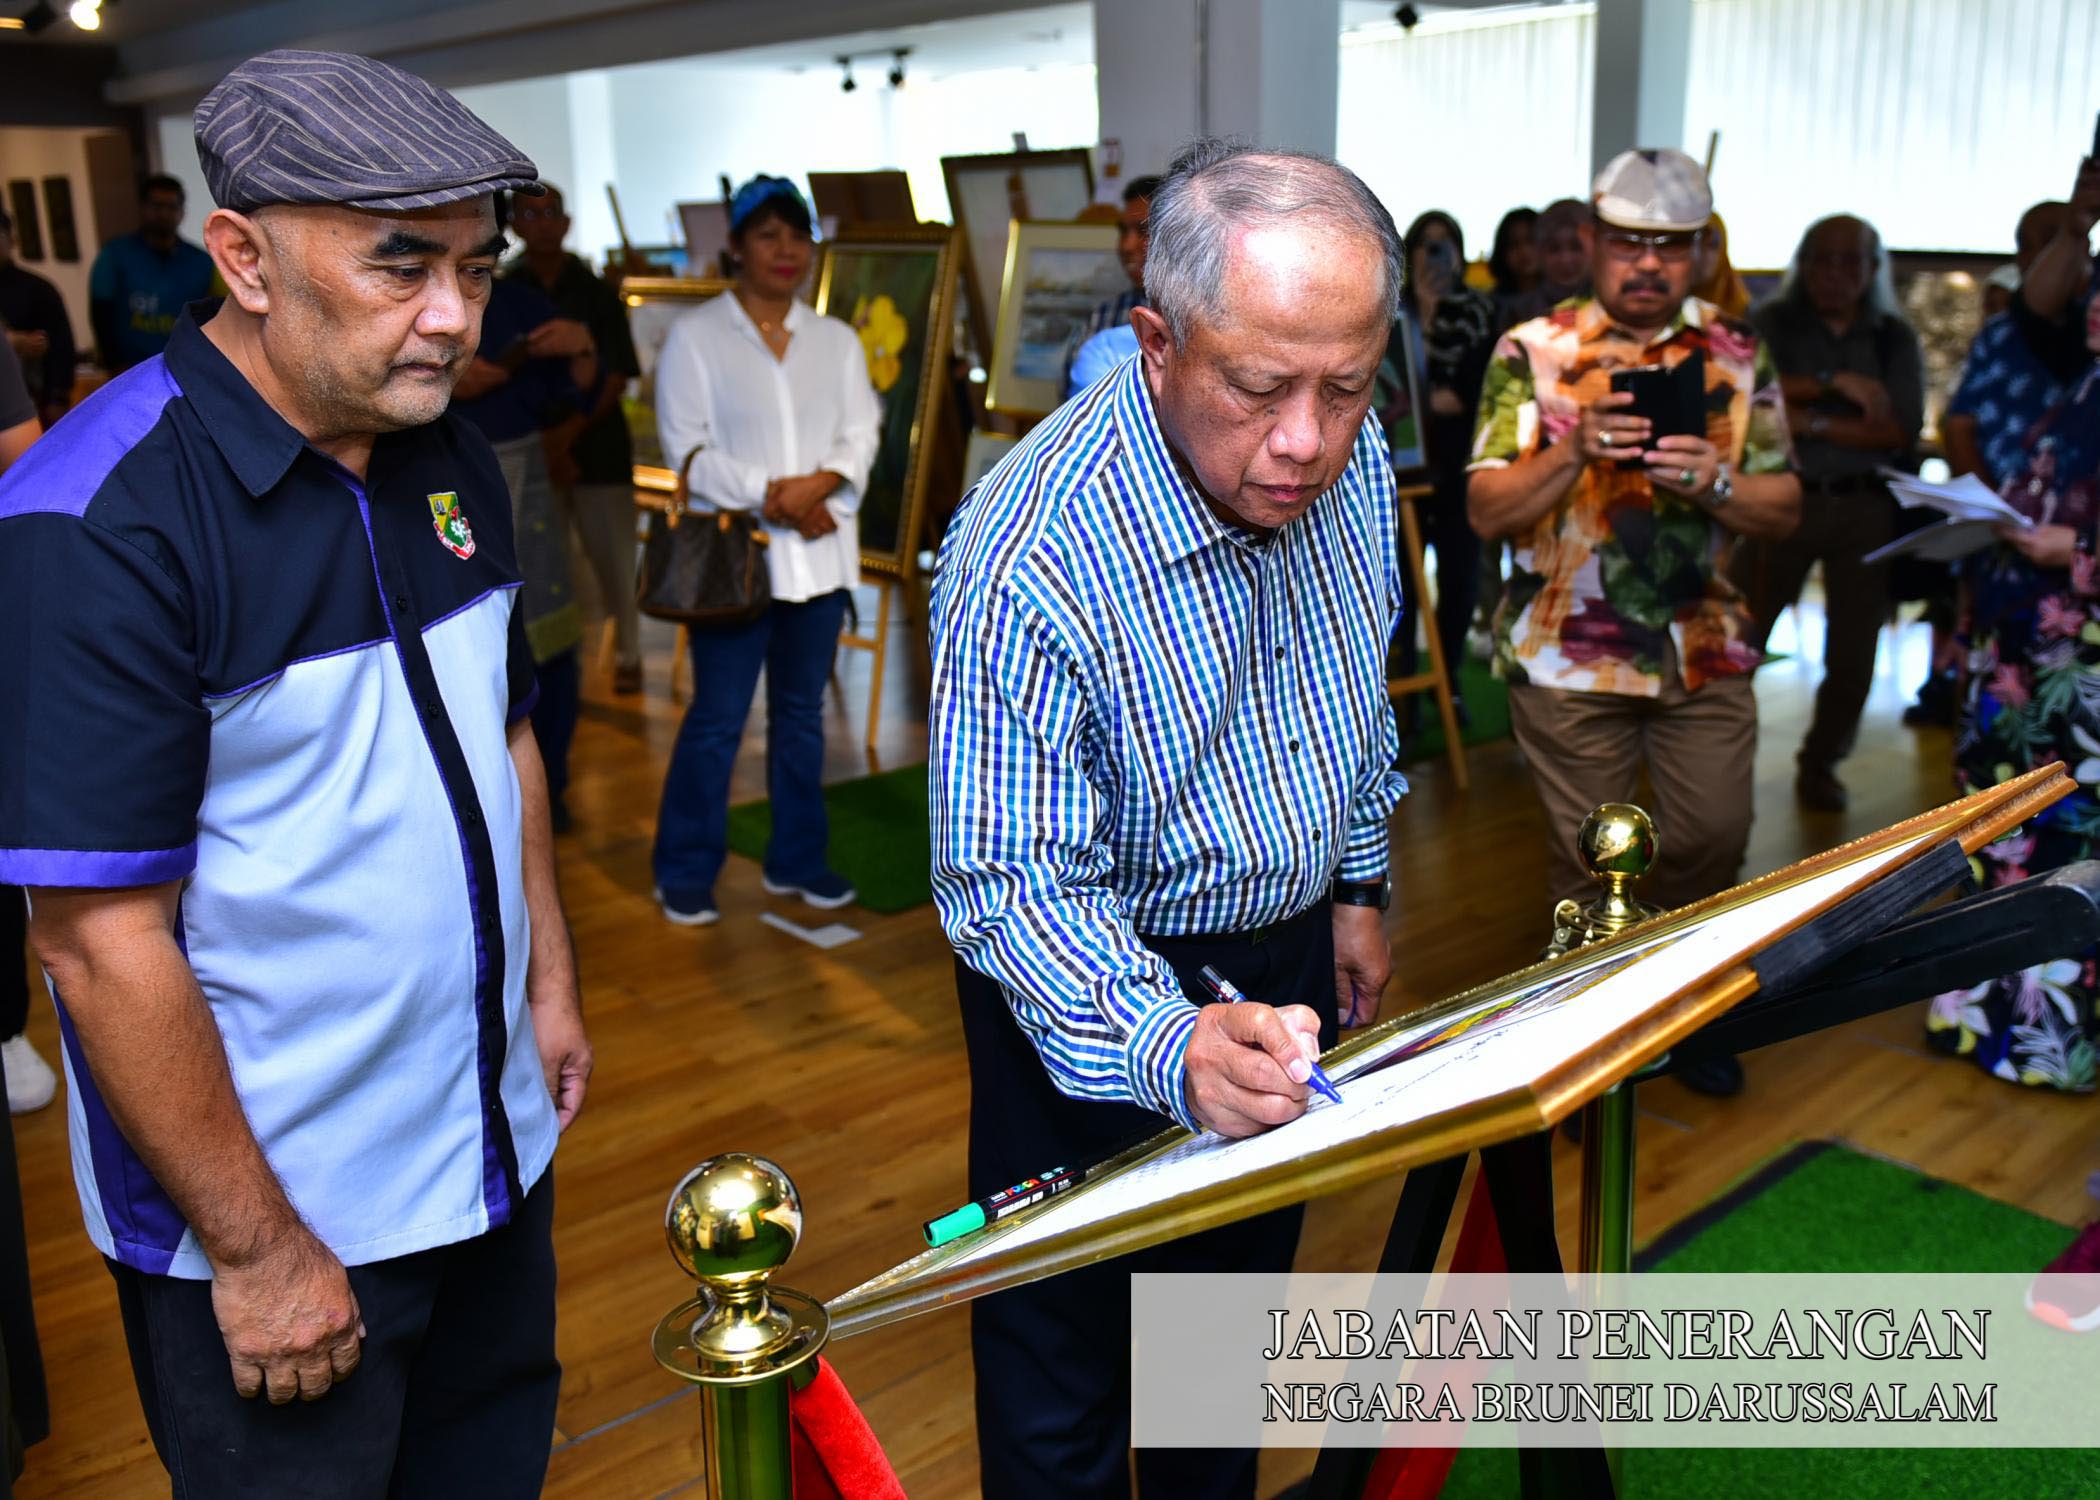 Opening of Art Visual Exhibition and Charity Bazaar